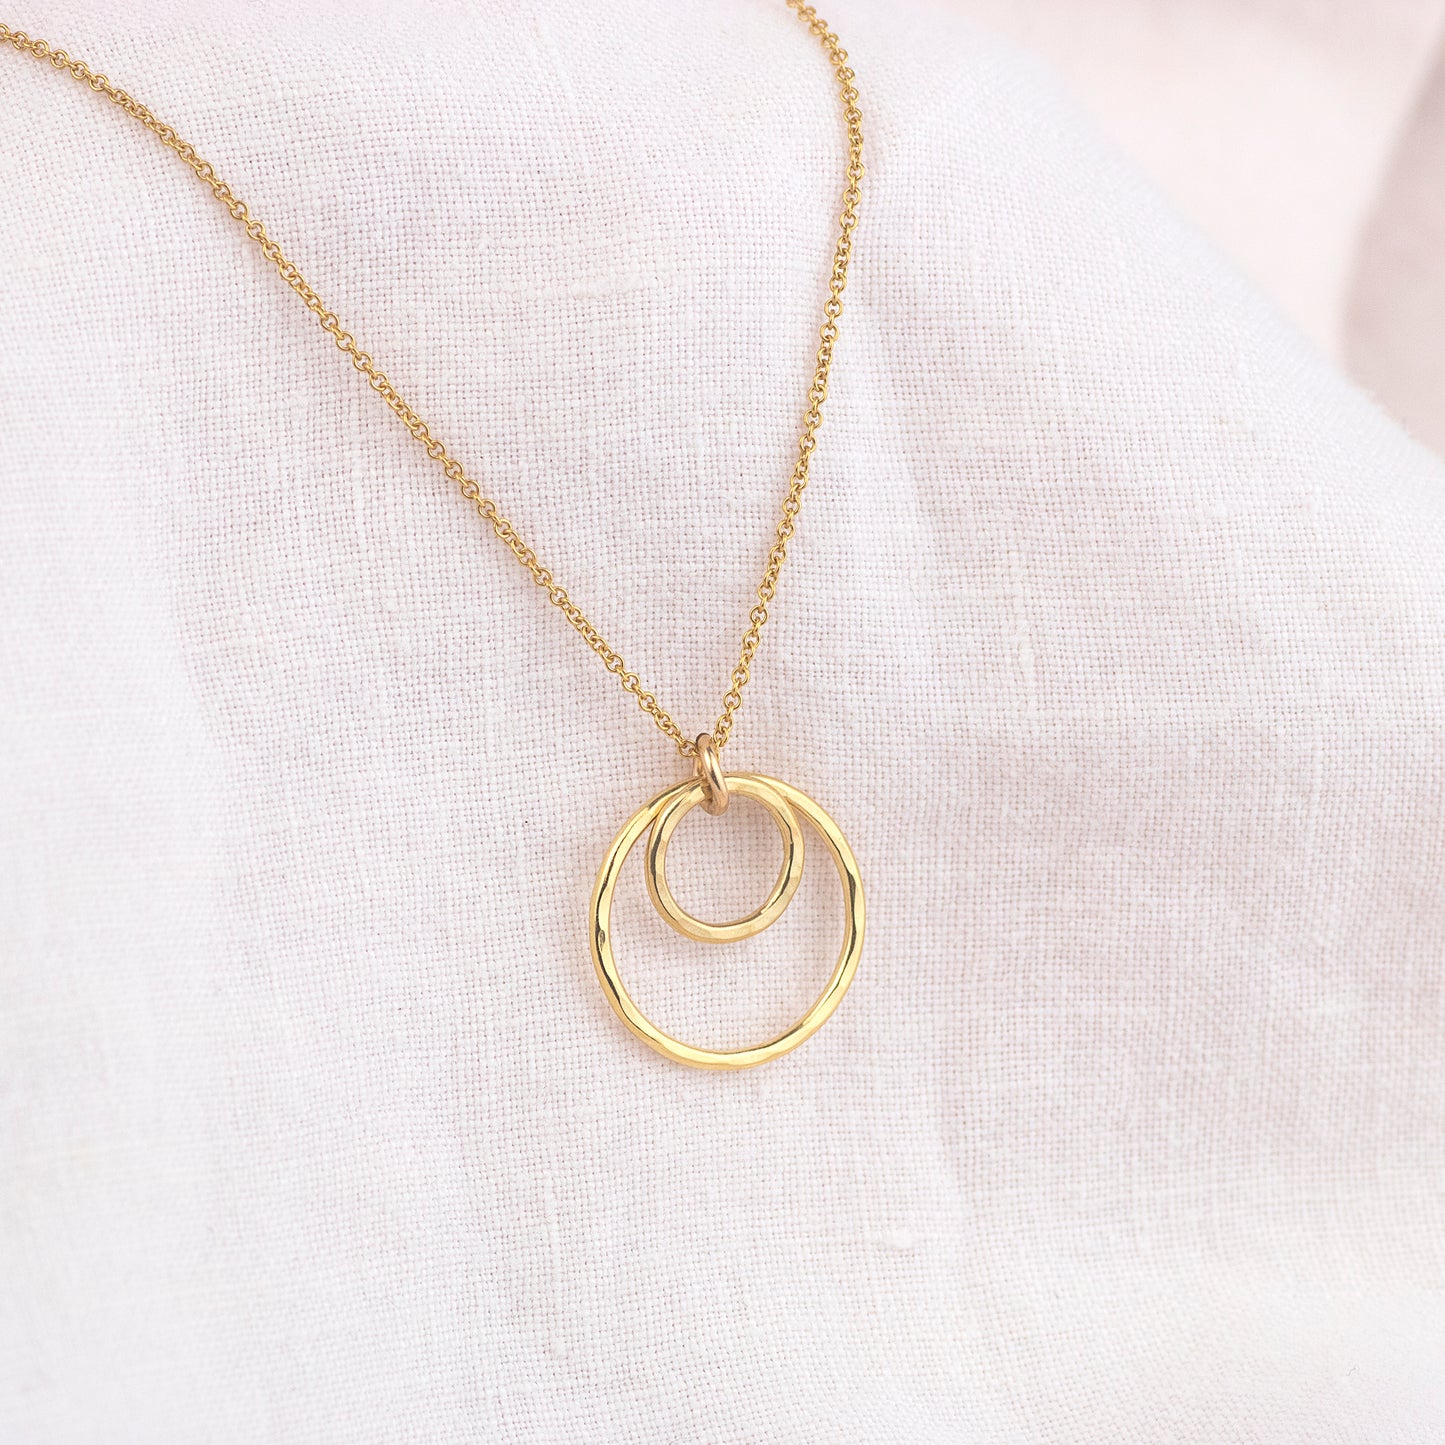 Going Away Gift for Daughter - Silver & Gold - Forever Encircled with Love